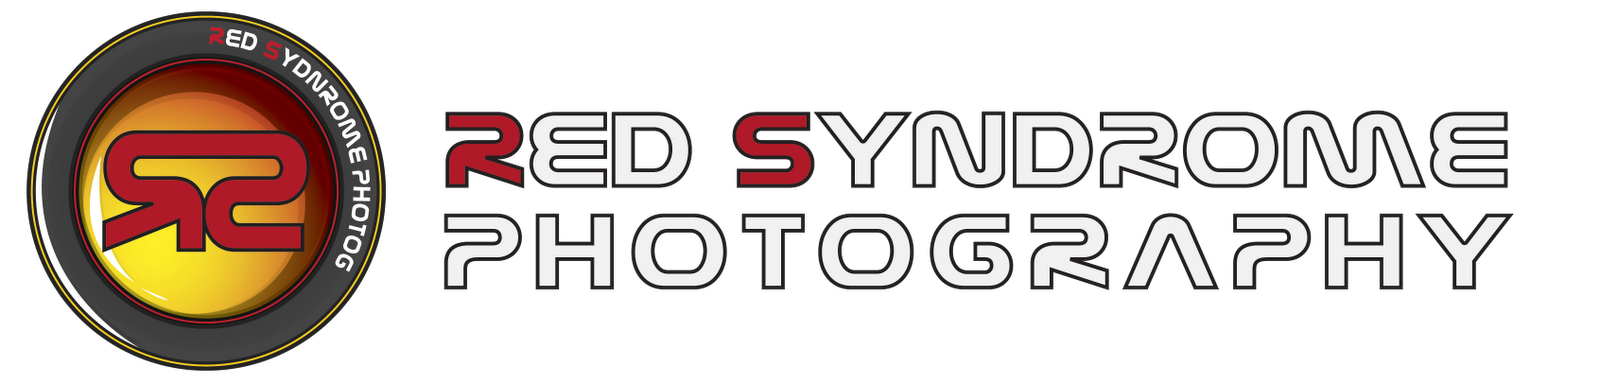 Red Syndrome Photography